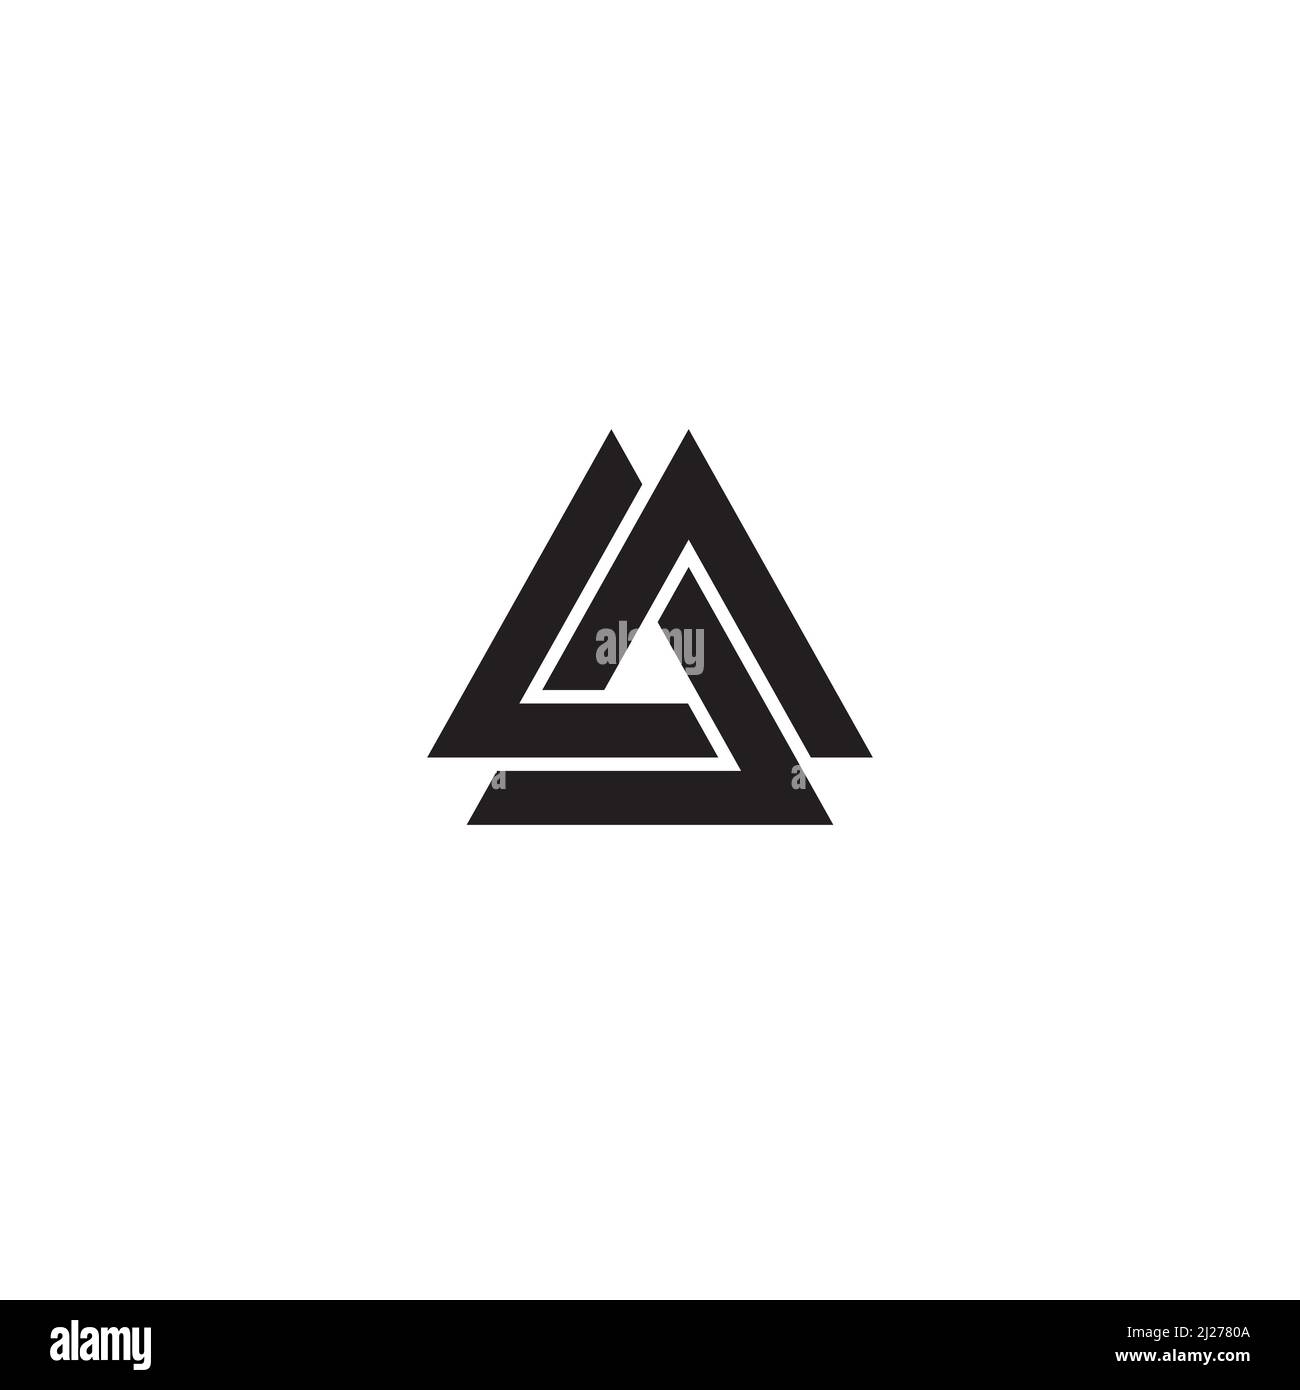 Triangles Black and White Stock Photos & Images - Alamy